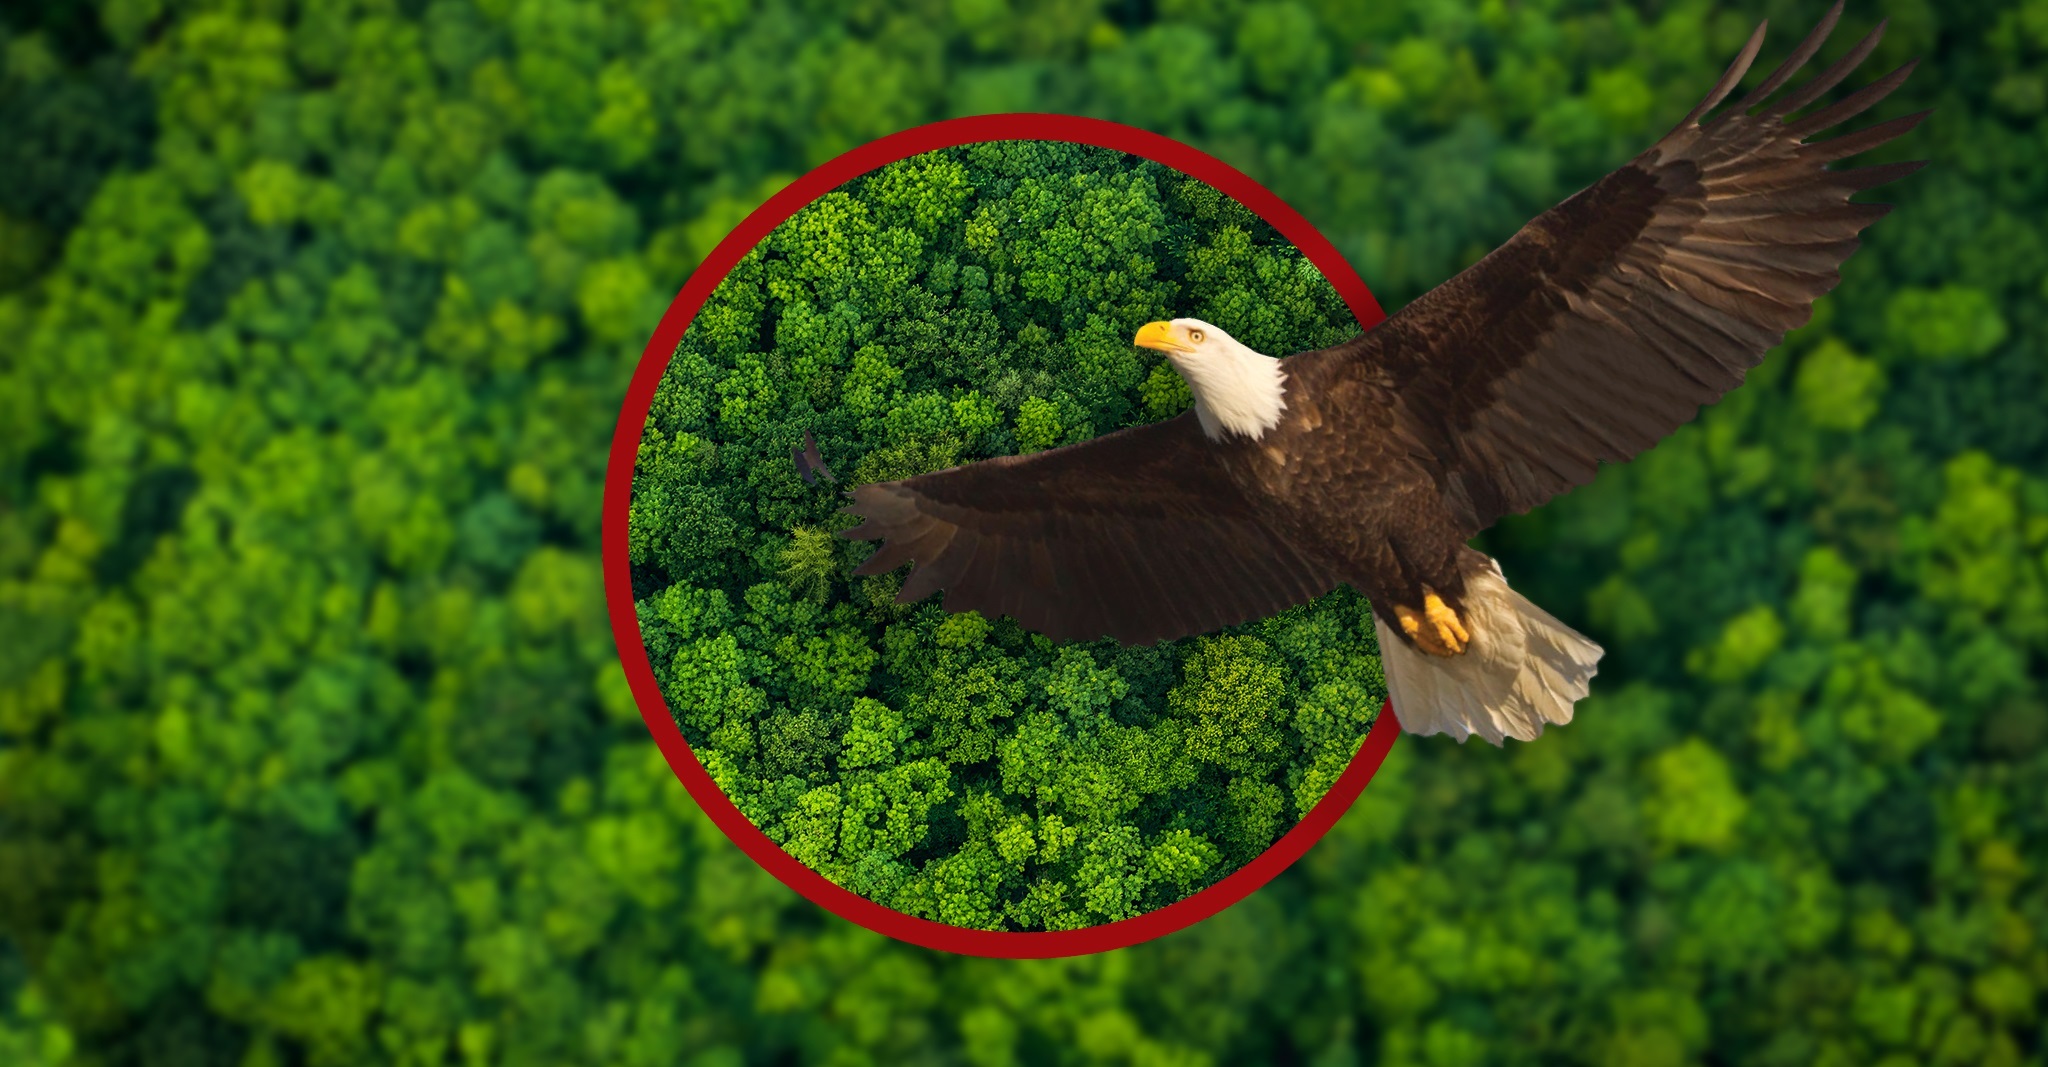 Natural astaxanthin inspired by eagles' vision | Vitafoods Insights